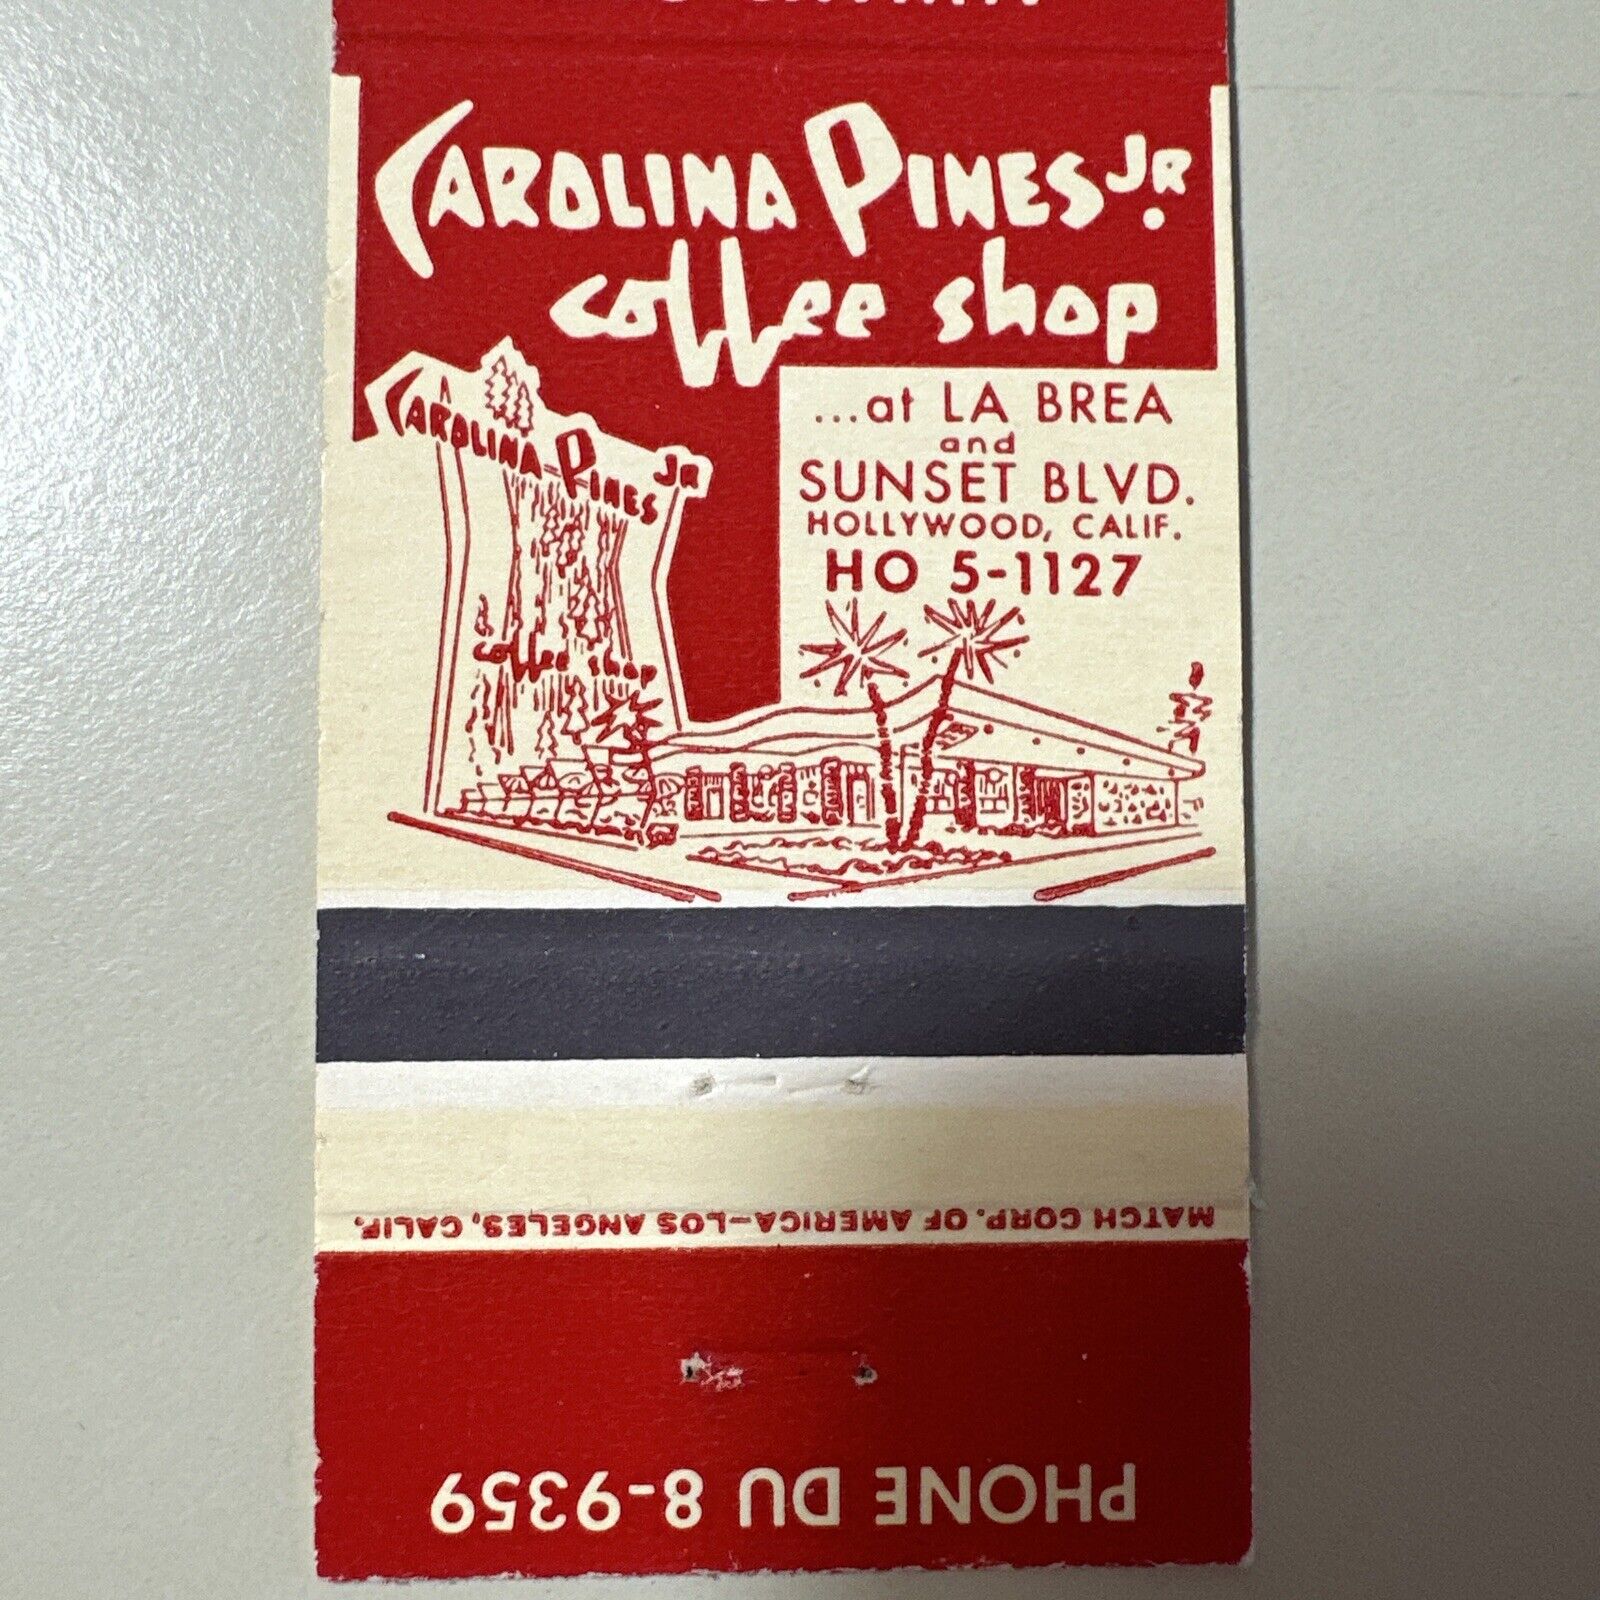 Vintage 1950s Carolina Pines Coffee Shop Hollywood Los Angeles Matchbook Cover